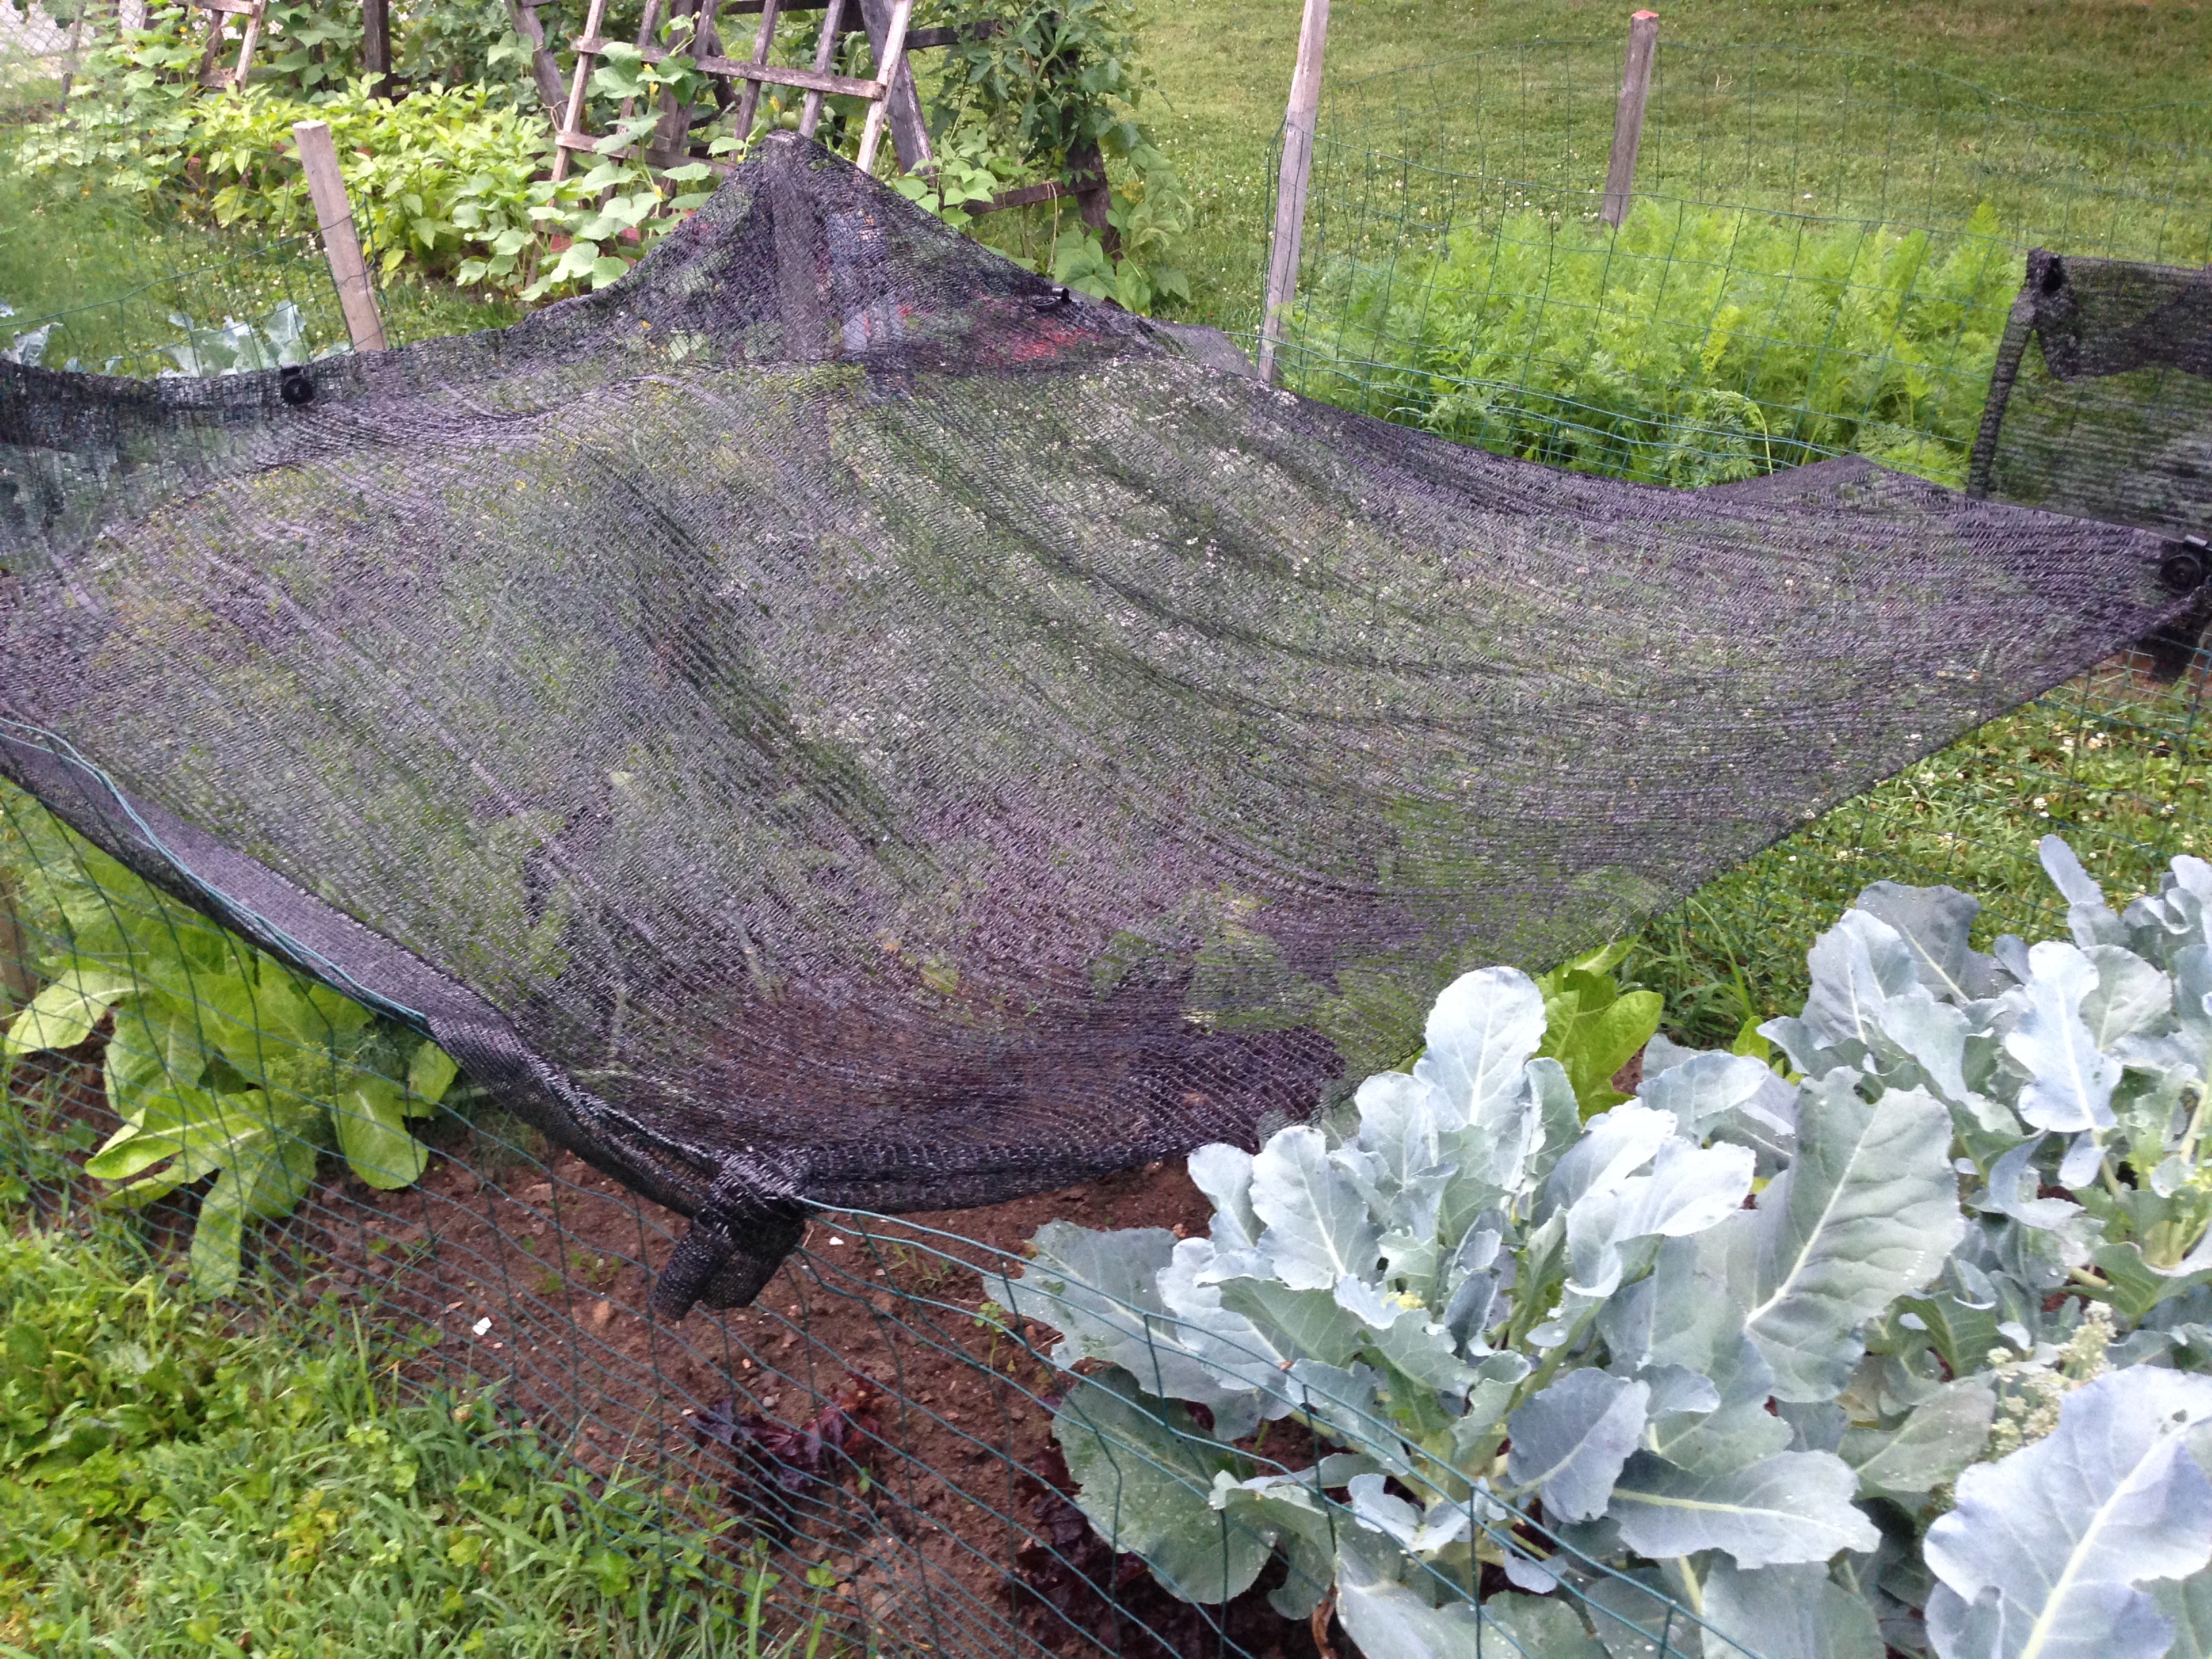 Shade cloth over the lettuce plants